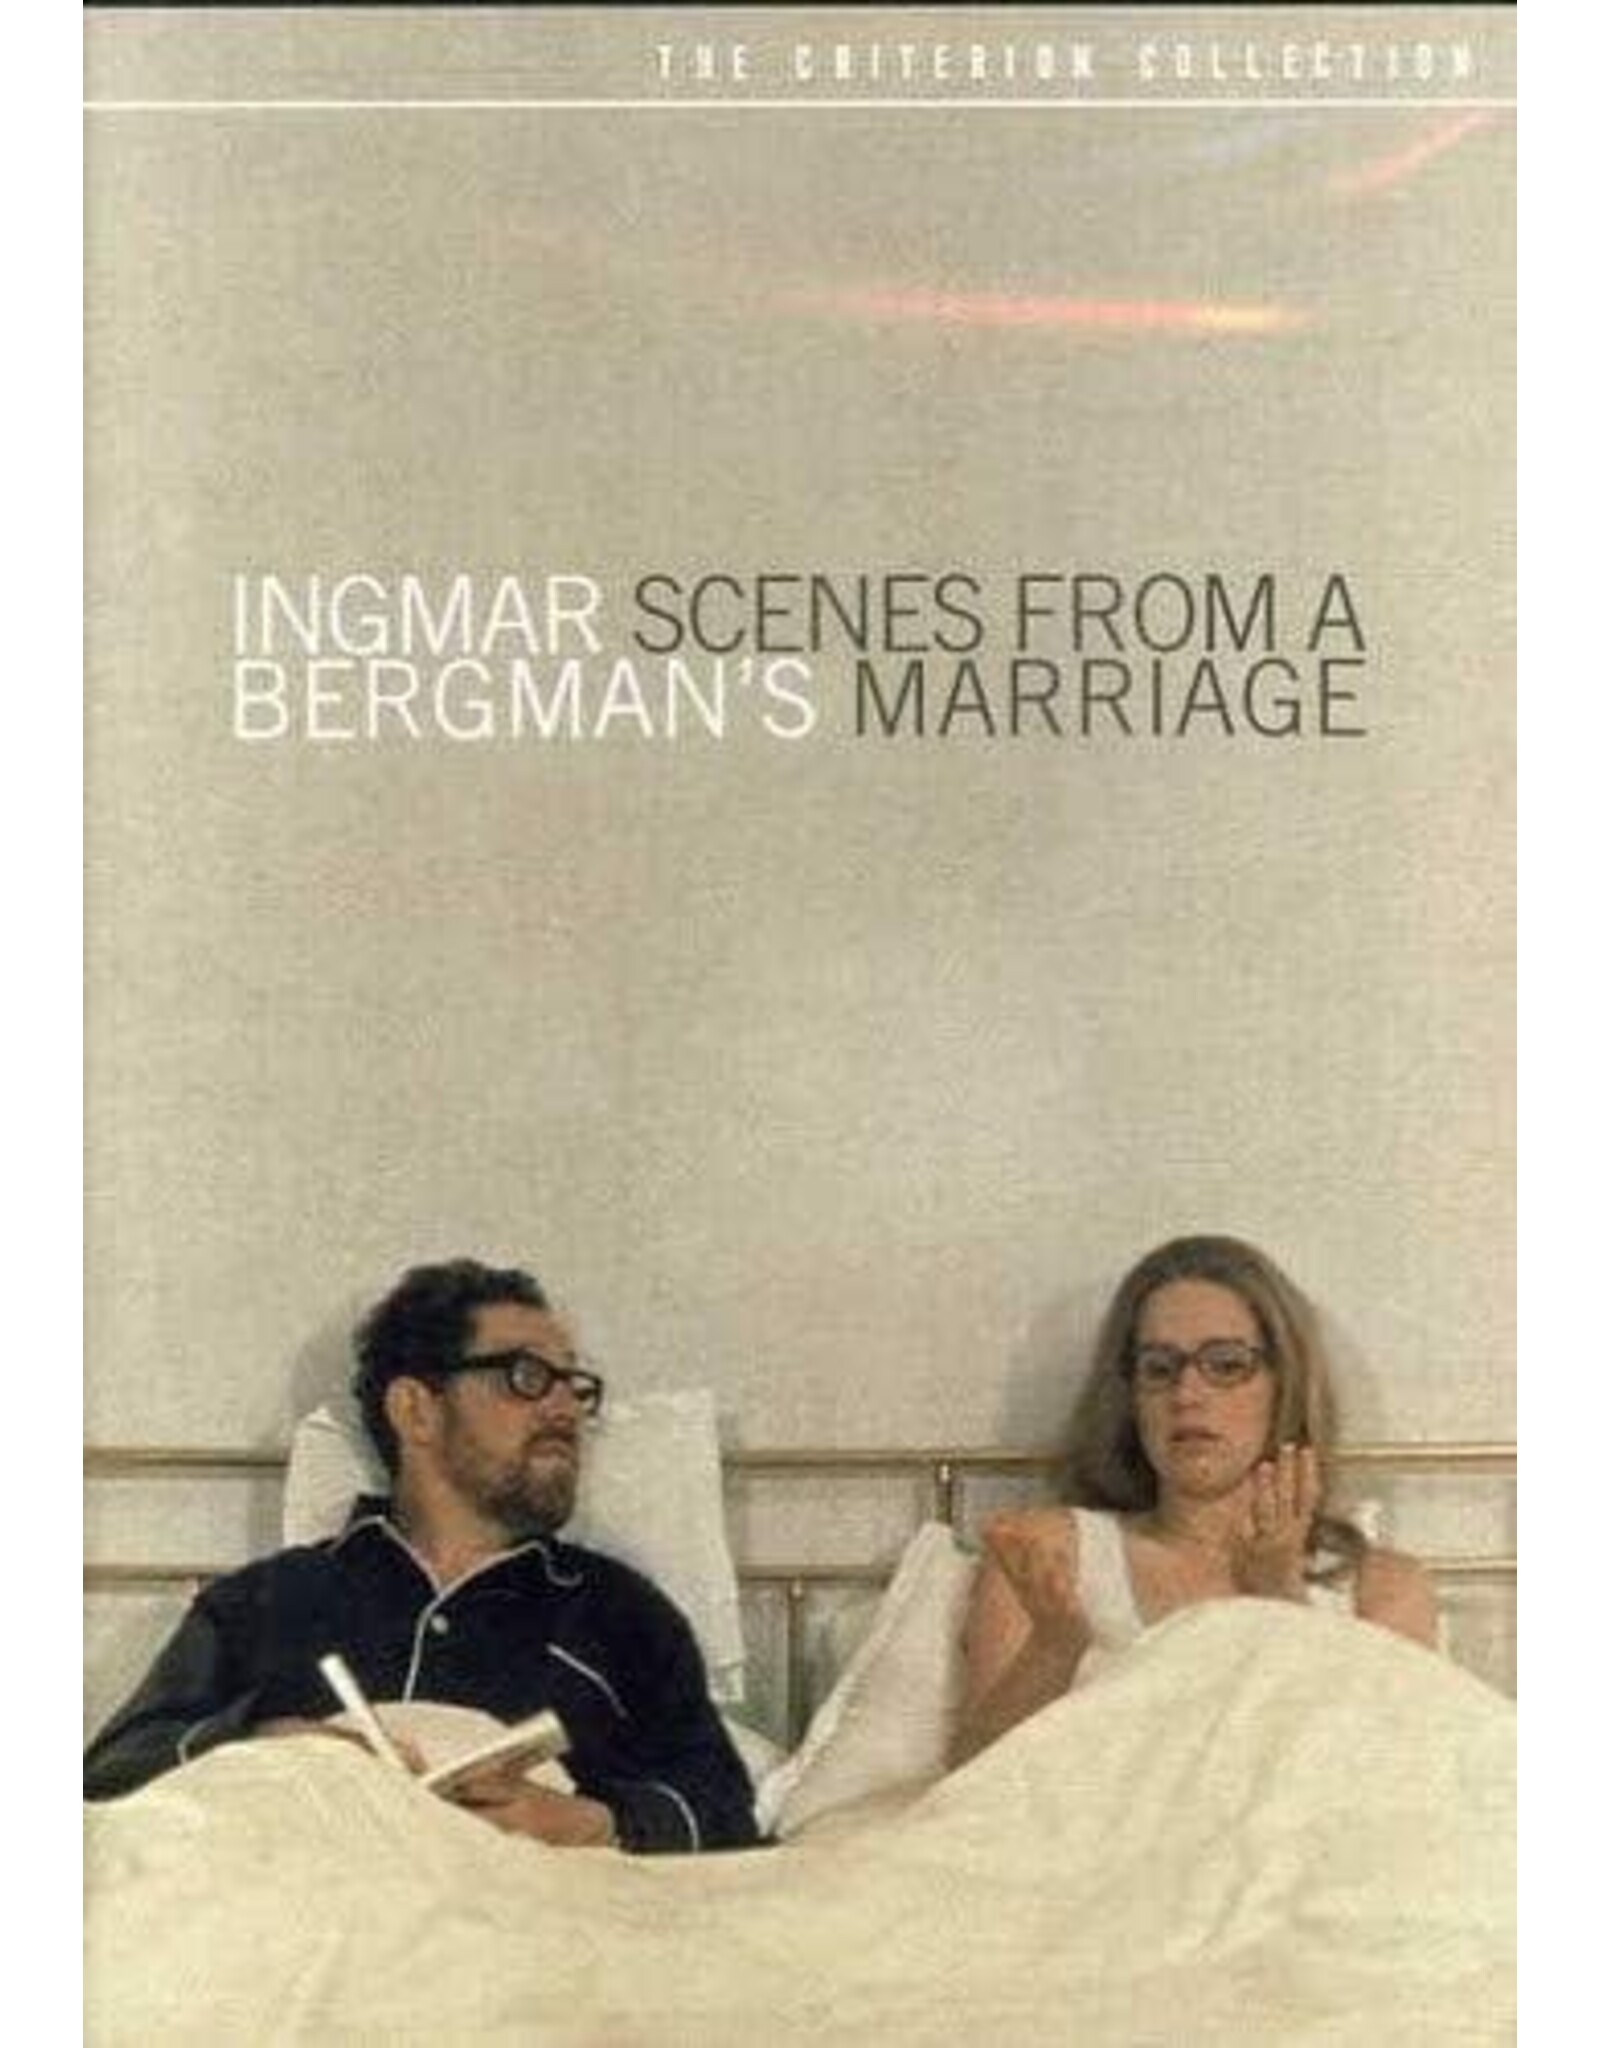 Criterion Collection Scenes From A Marriage - Criterion Collection (Brand New)